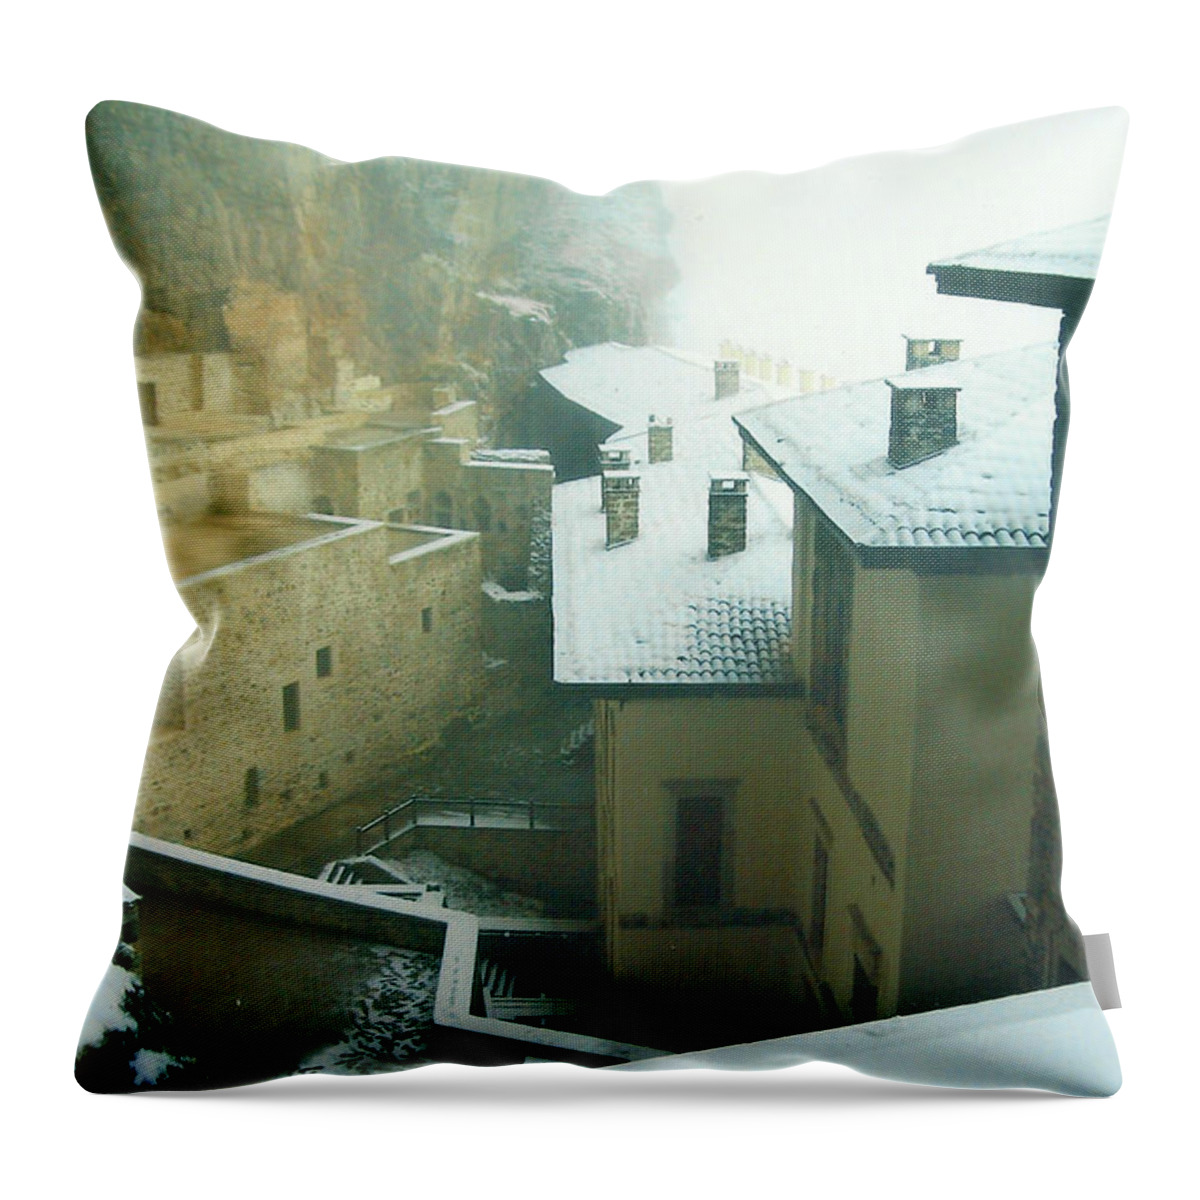 Mountain Monastery Throw Pillow featuring the photograph Inside the Monastery by Lou Ann Bagnall